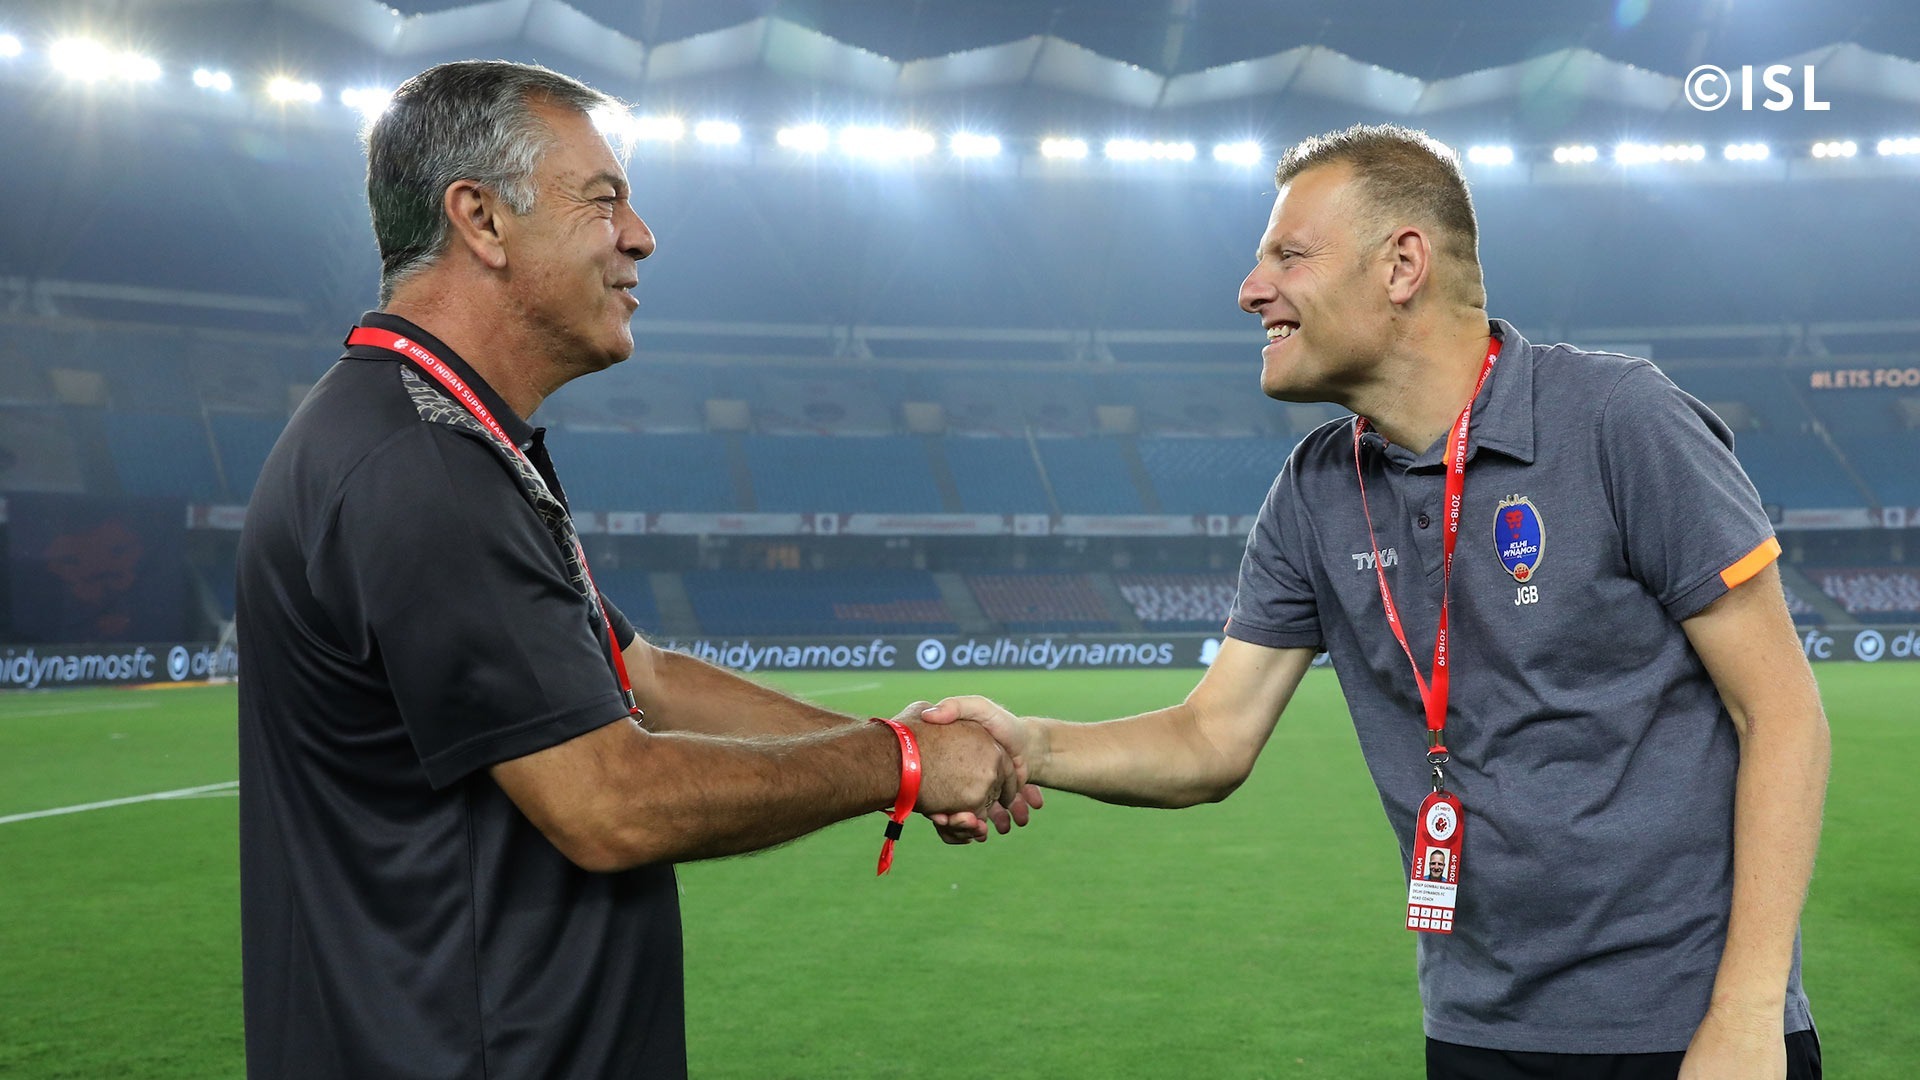 ISL 2018 | I am satisfied with the work put in by the boys, says Josep Gombau